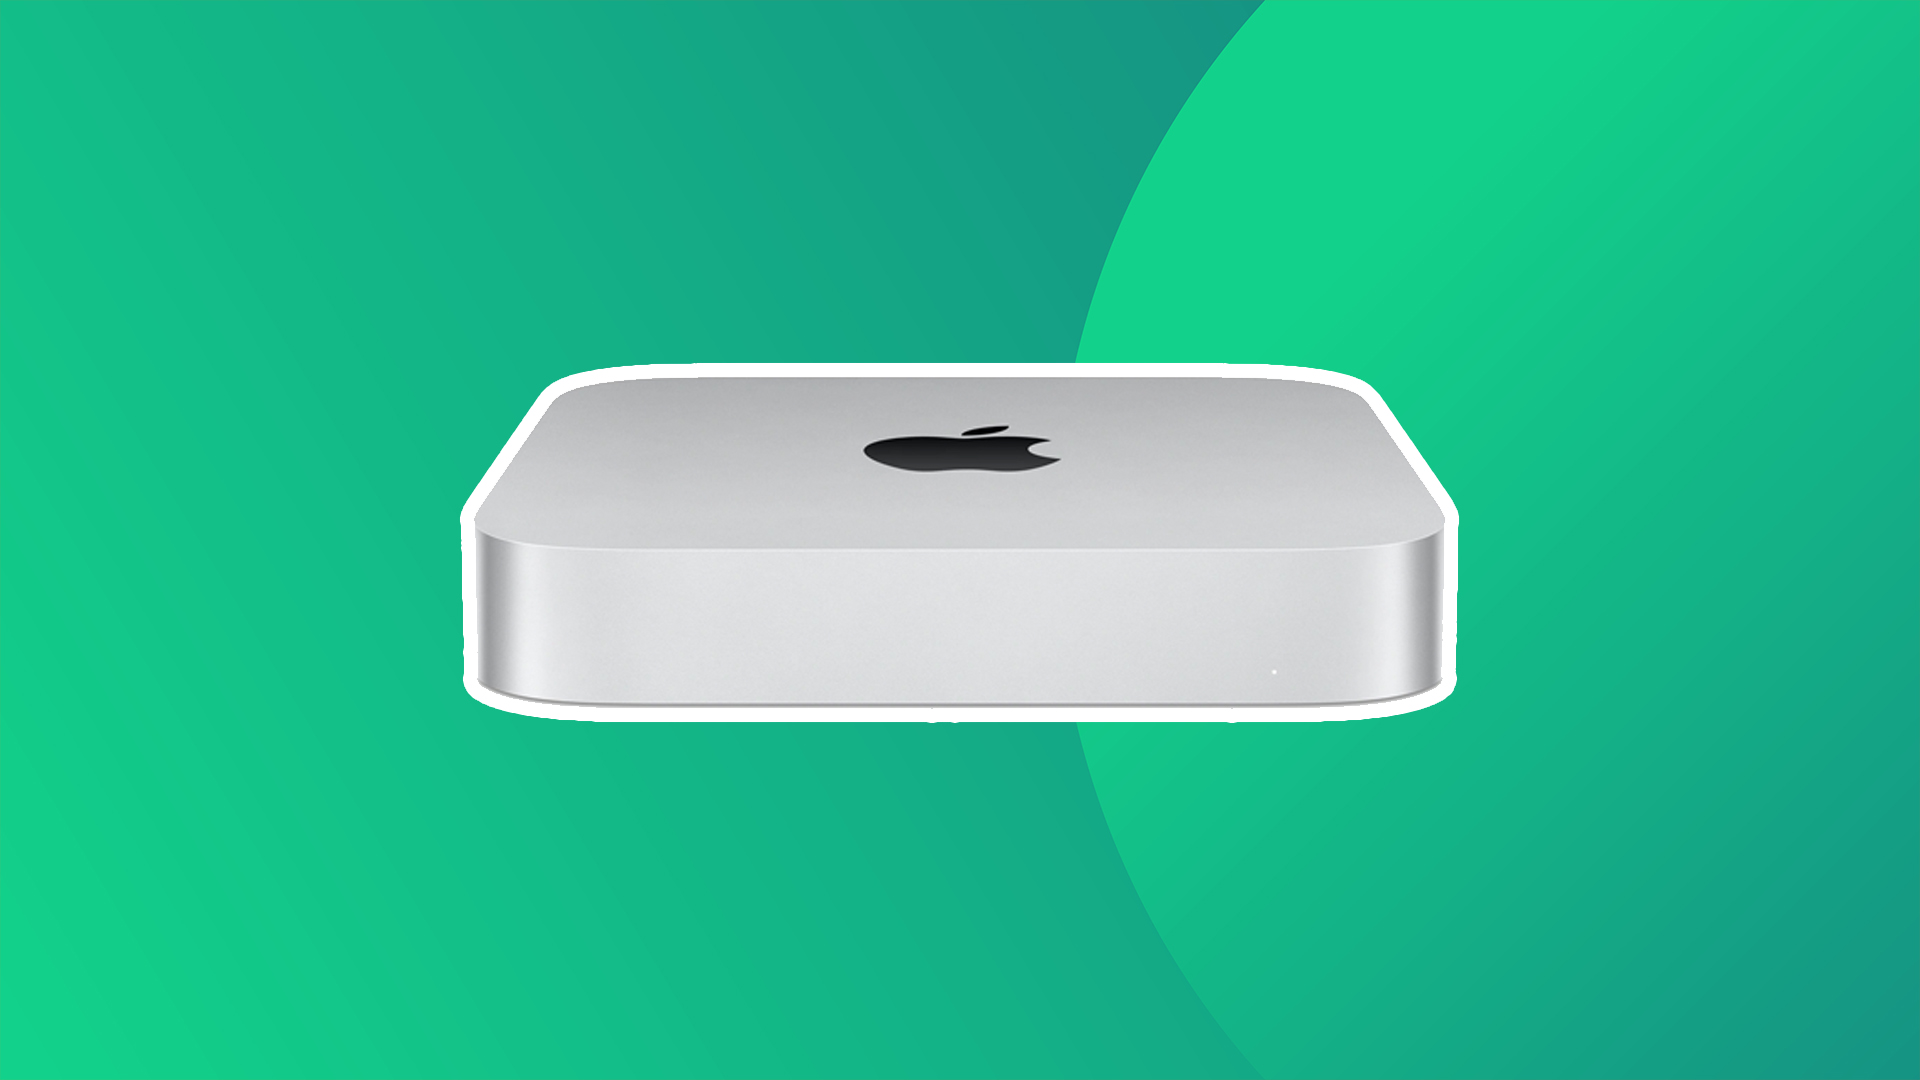 Top deal: M1 Mac mini with 16GB RAM drops to $799 ($100 off)